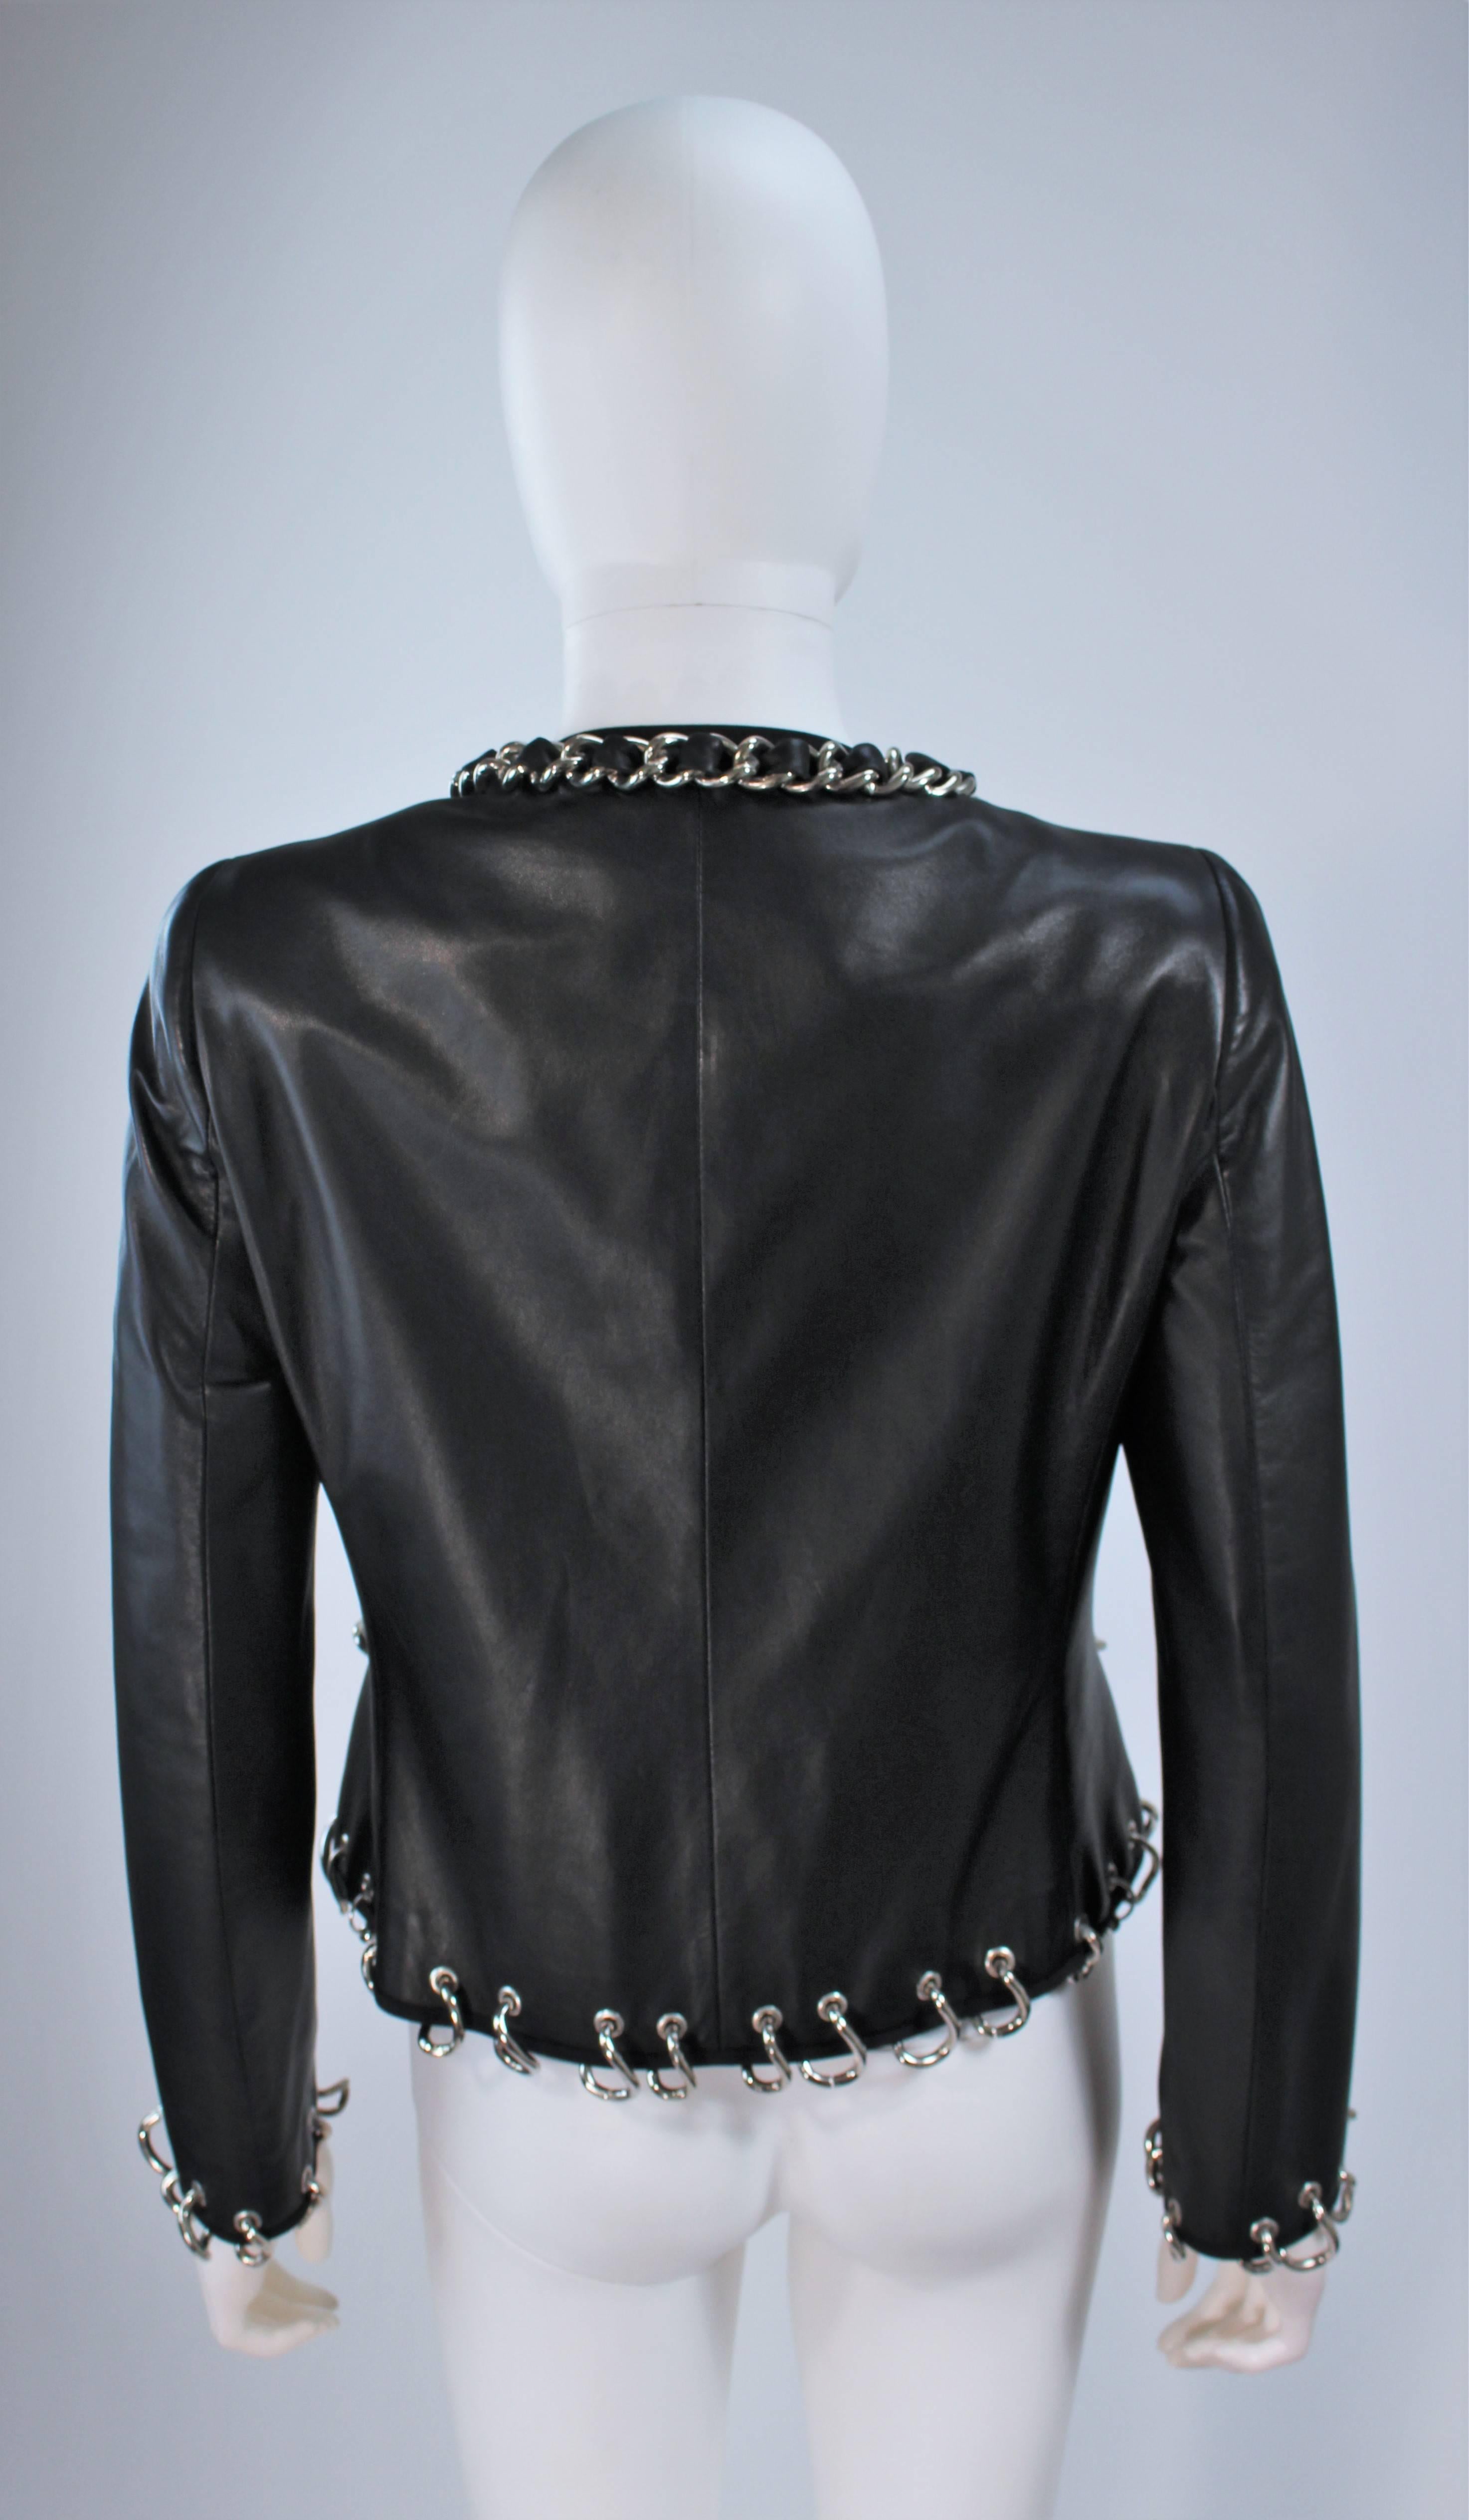 Women's MOSCHINO RARE Fetish Piercings and Chains Leather Lamb Skin Jacket Size 40 8